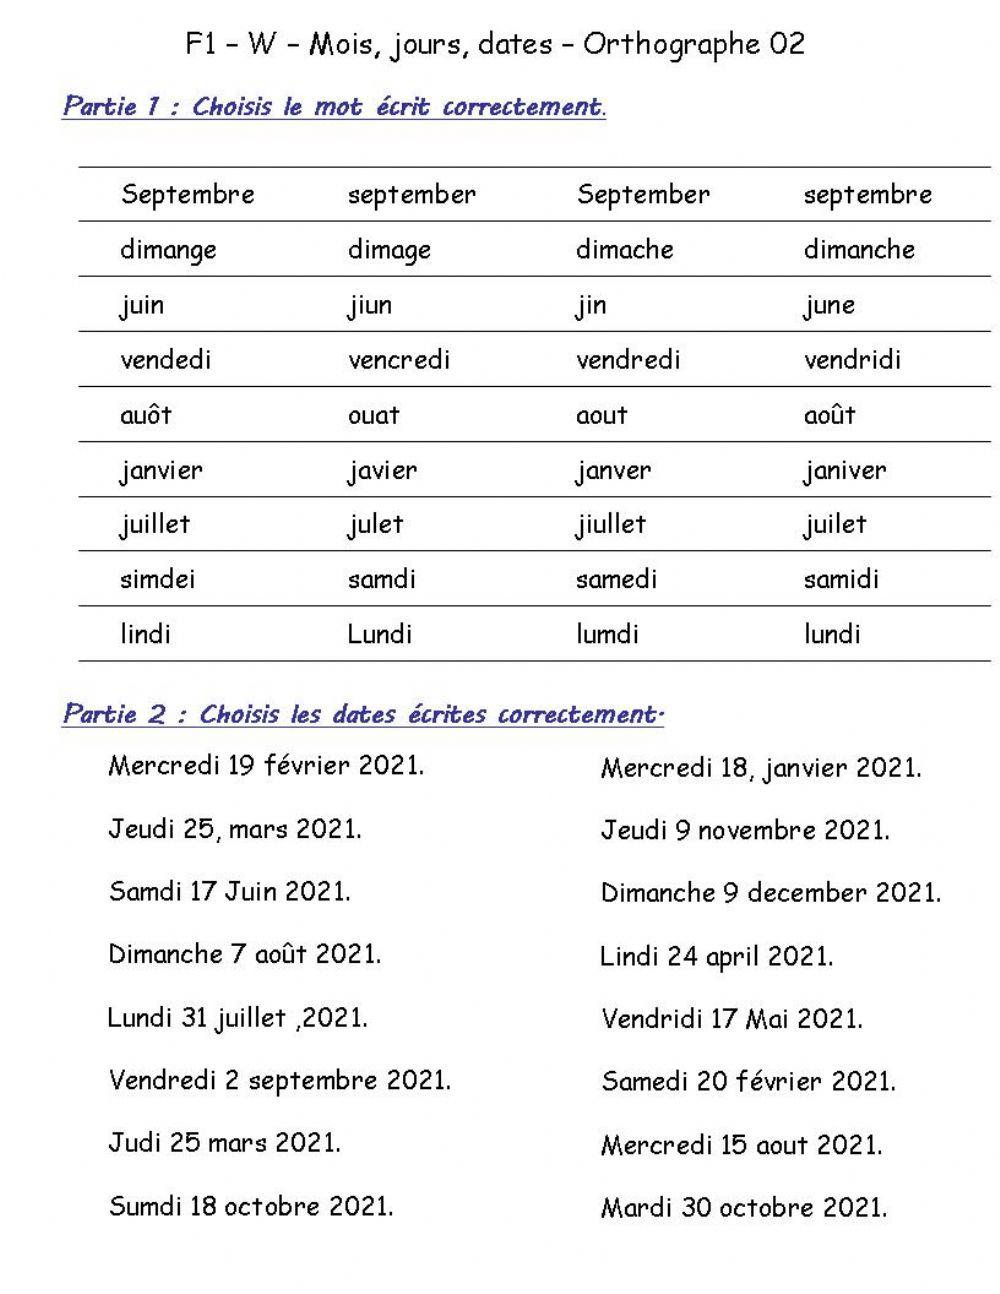 F1 - W - Mois, jours, dates - Orthographe 02